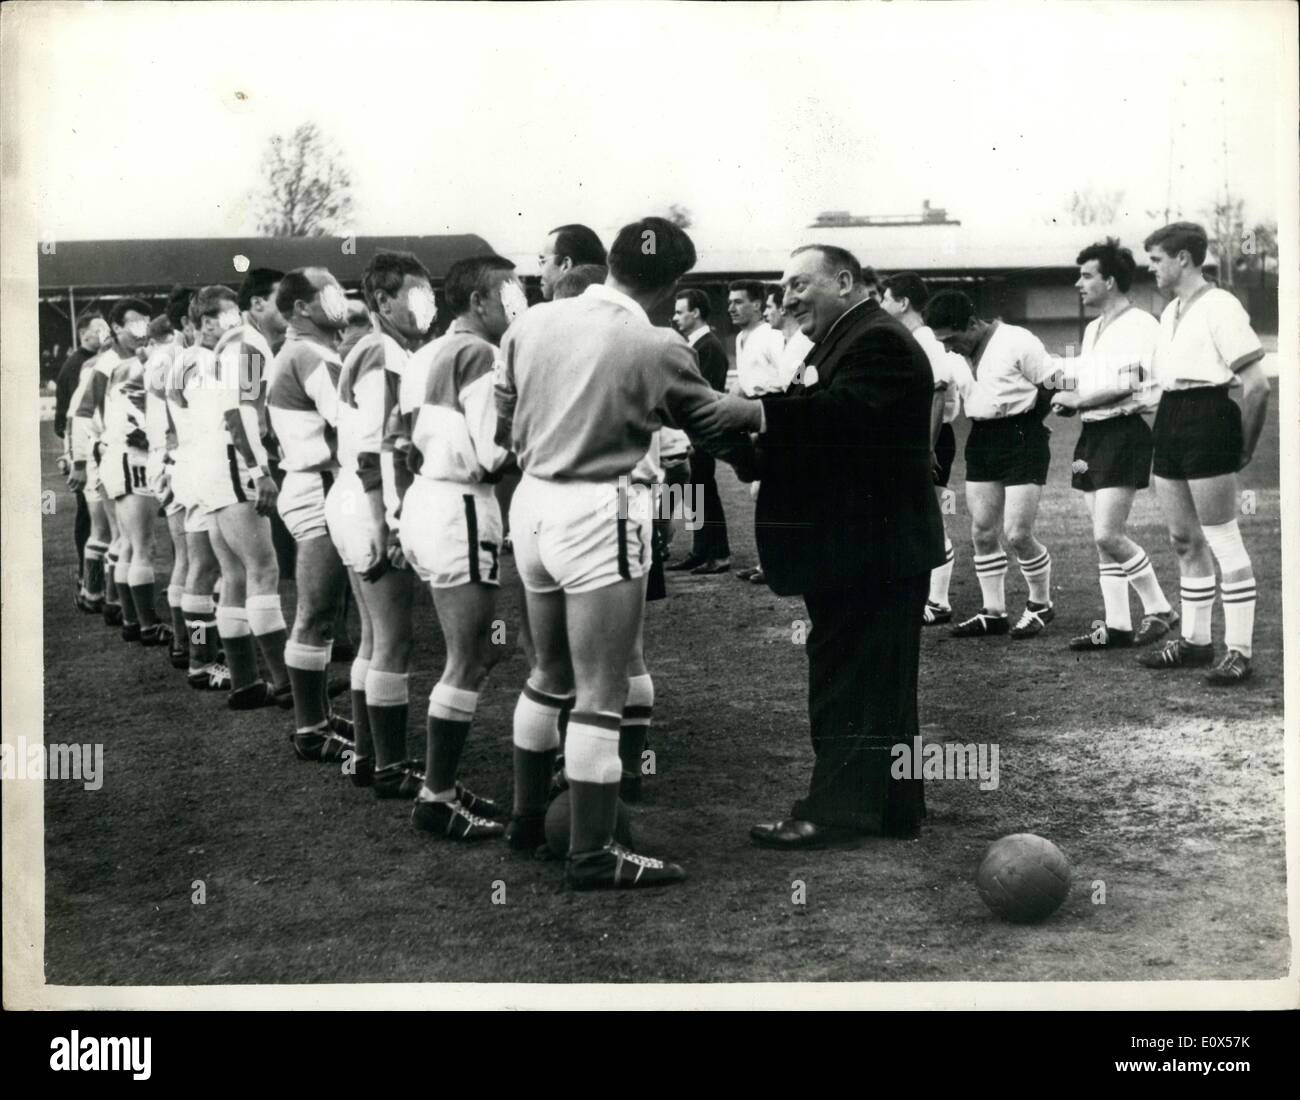 Apr. 04, 1965 - Prison Football Team win a cup final.: The football team from Chelmsford Prison, were last night allowed out for the first time to take part in the Division 11 Cup Final of the Wild-Essex Combination - against Thexted village football club, at the Chelmsford City ground.The prsion team won by 6 goals to 4. Captain W.I Davies, the prison Governor was at the match to cheer the prison team to victory. Photo shows an official of the Mid-Essex Combination - shaking hands withe the prison team prior to the match last night Stock Photo